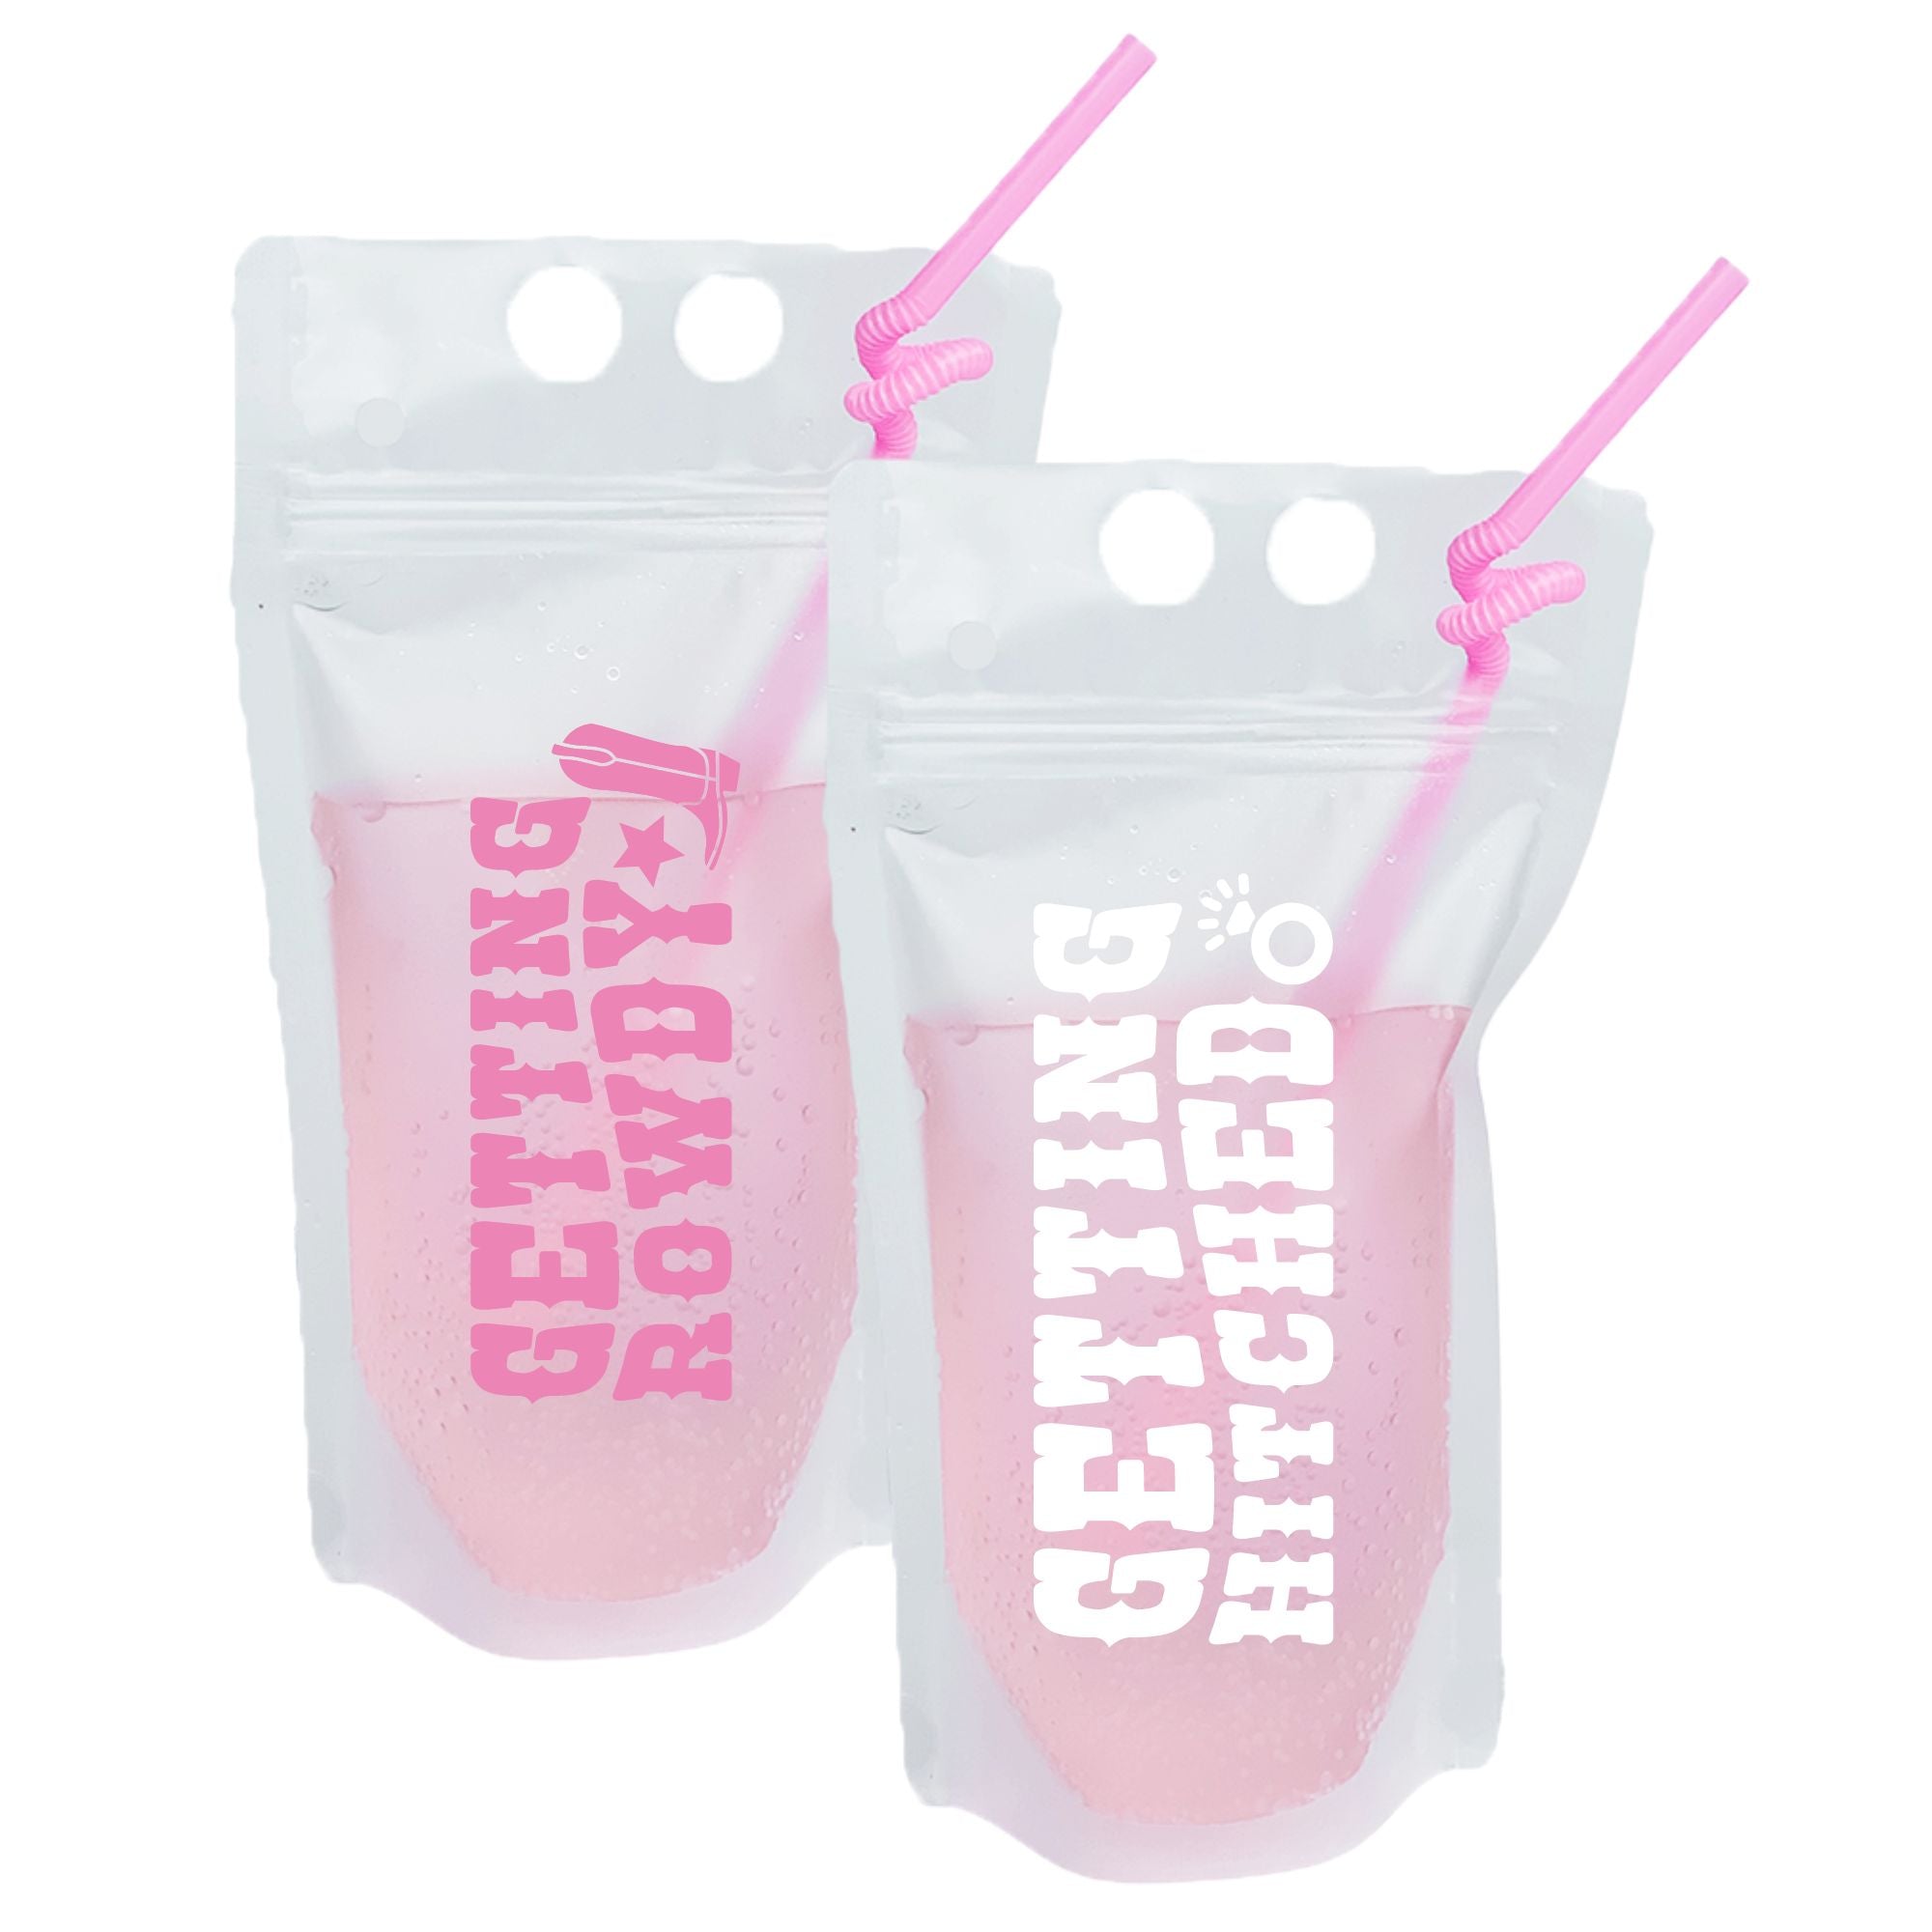 Getting Hitched / Getting Rowdy Party Pouch - Sprinkled With Pink #bachelorette #custom #gifts